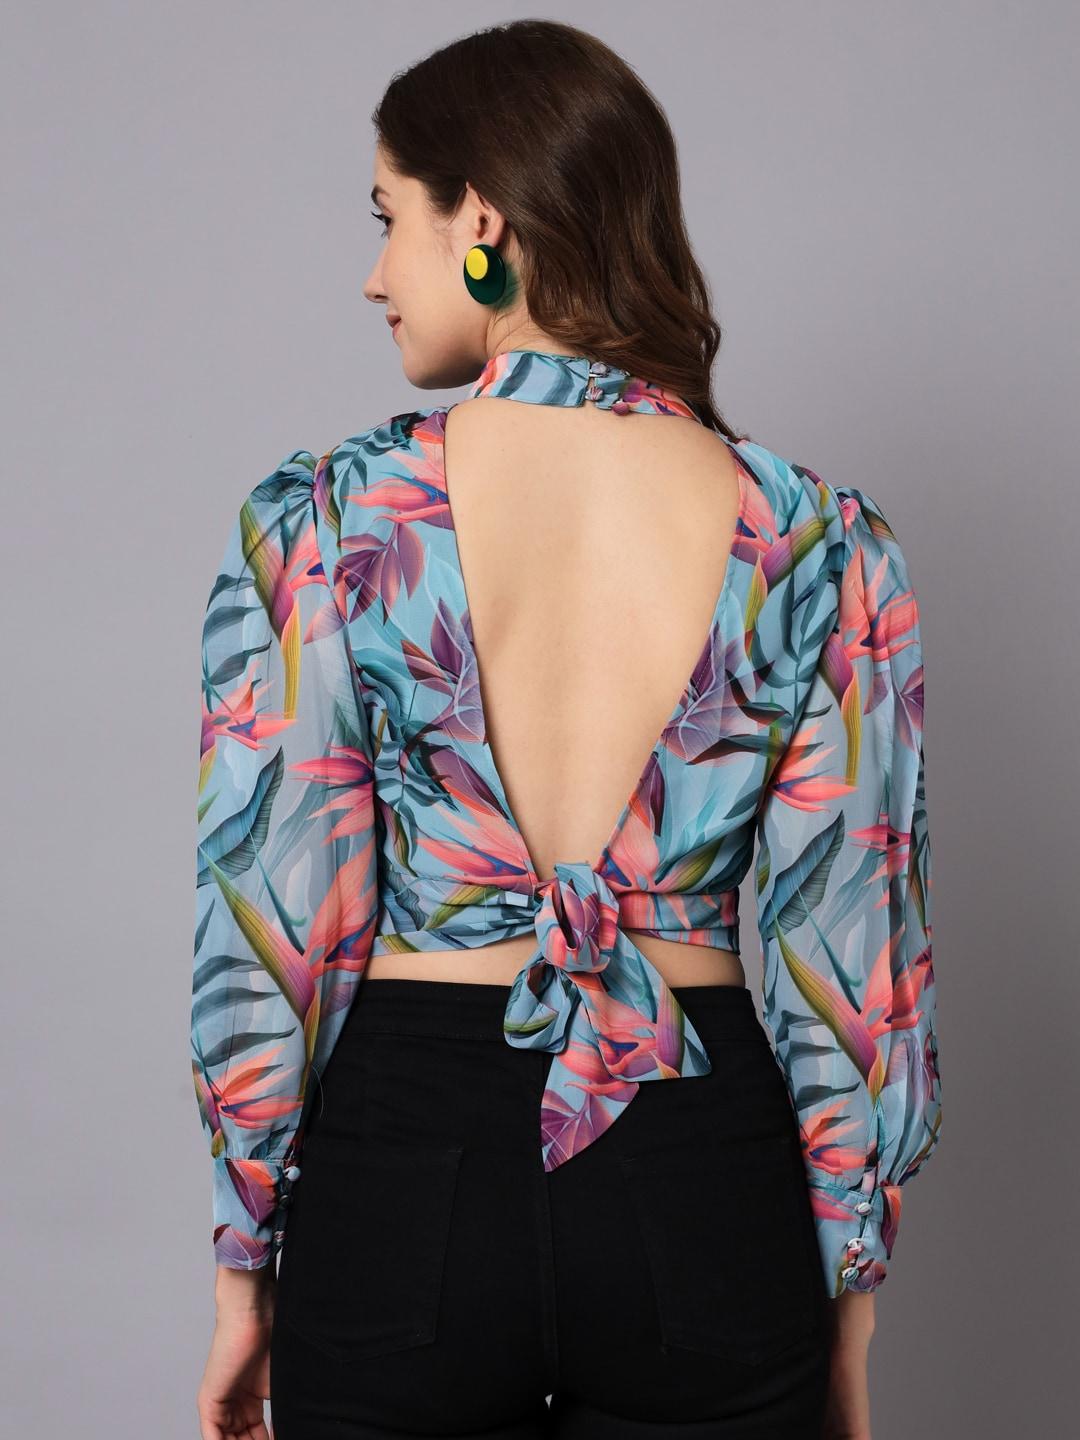 The Dry State Floral Printed Tie-Up Styled Back Crop Top